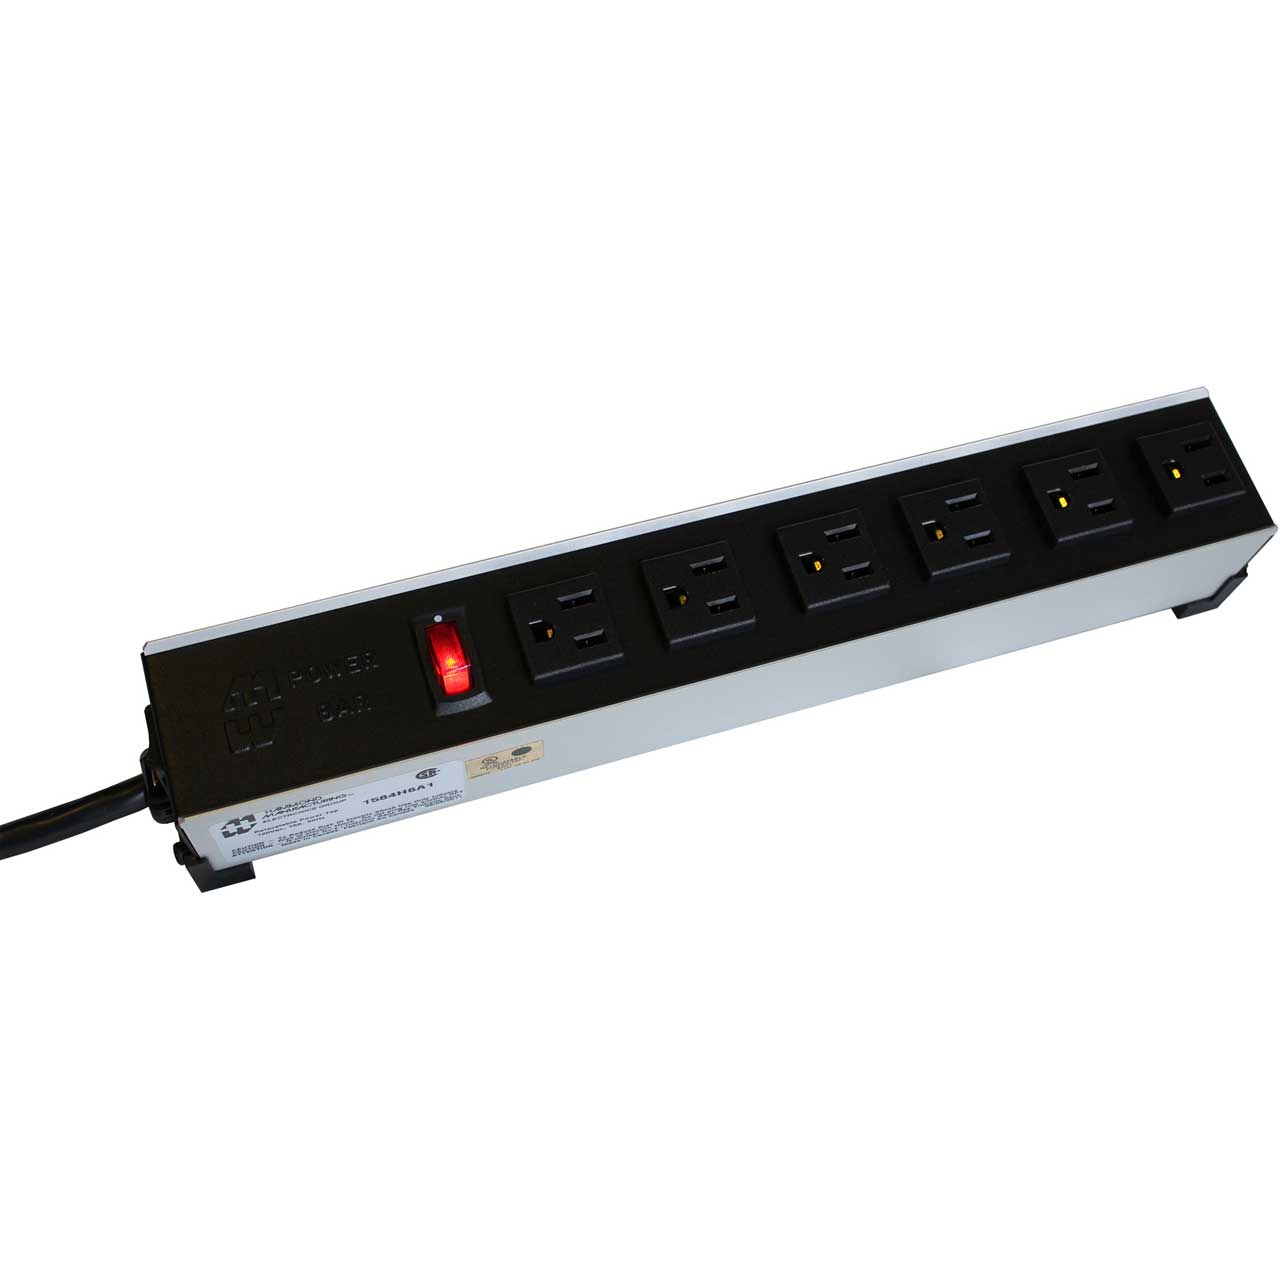 Hammond 1584H8A1 15A H.D. - 8 Outlet Strip w/ Switch - 6 Foot Cord - Outlets Front - Rocker Type On/Off Switch - Black 1584H8A1